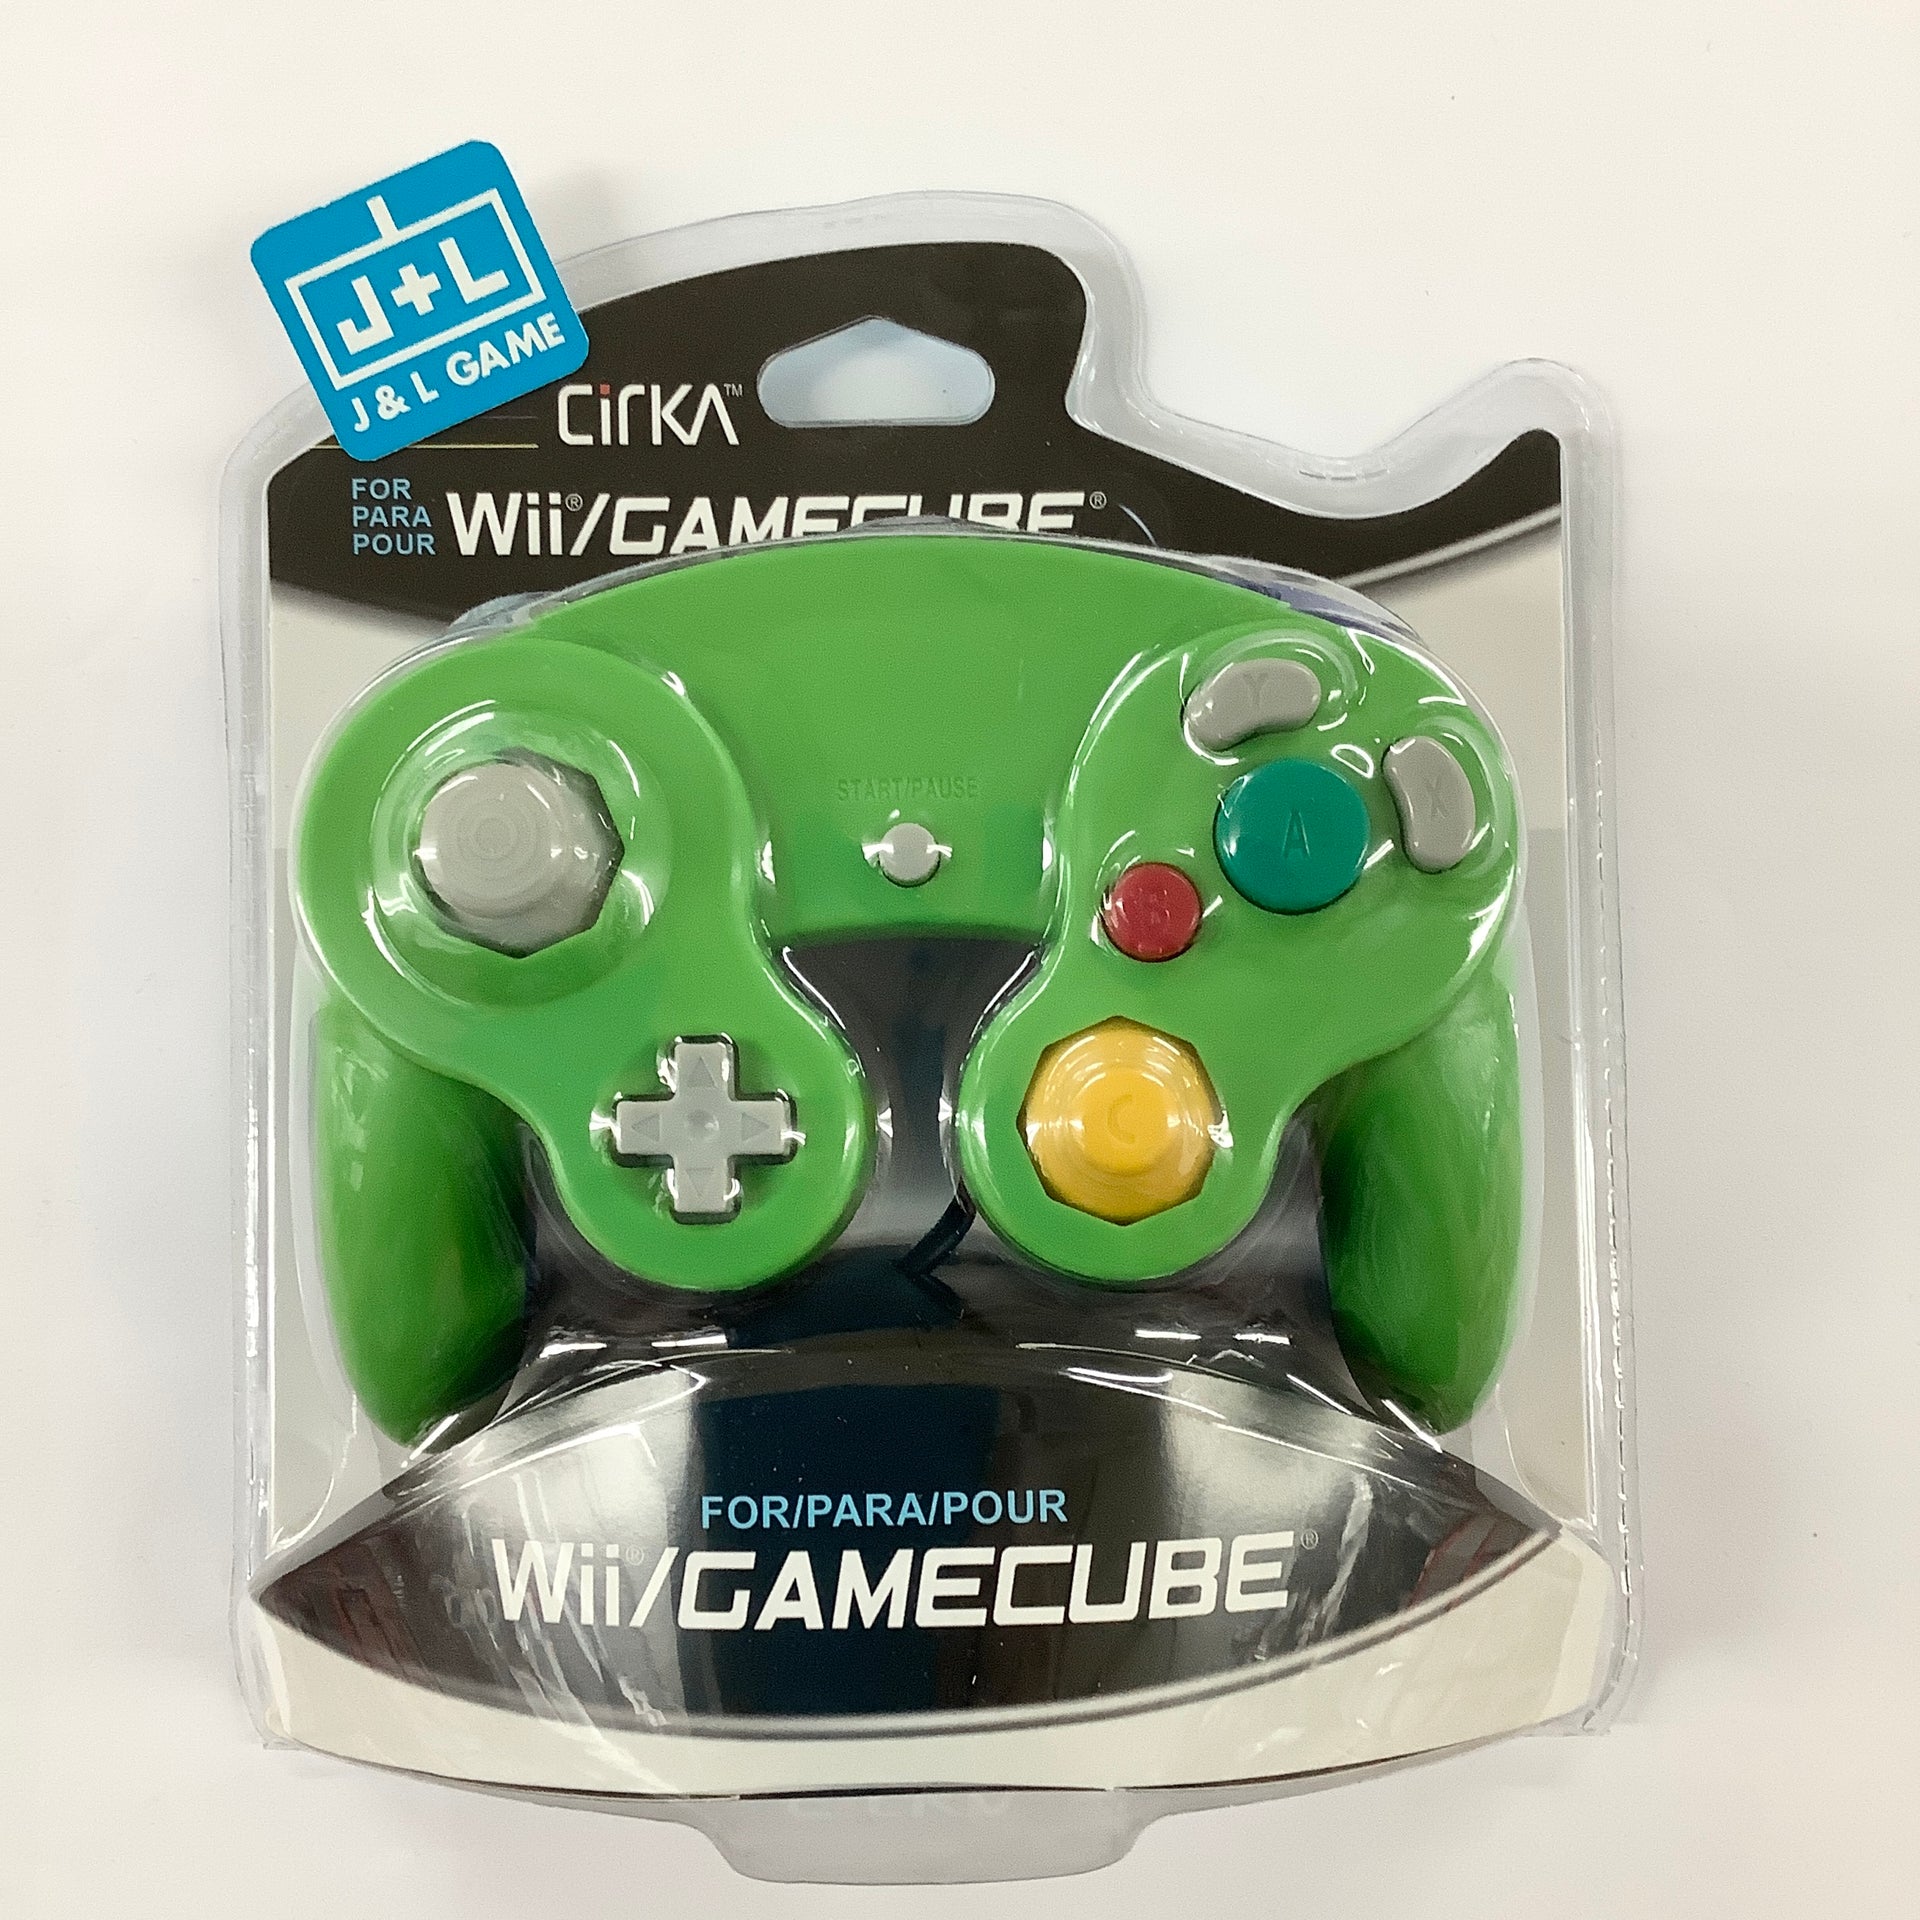 4 BRAND NEW CONTROLLERS FOR NINTENDO GAMECUBE or Wii BLACK, GREEN, CLEAR,  ORANGE